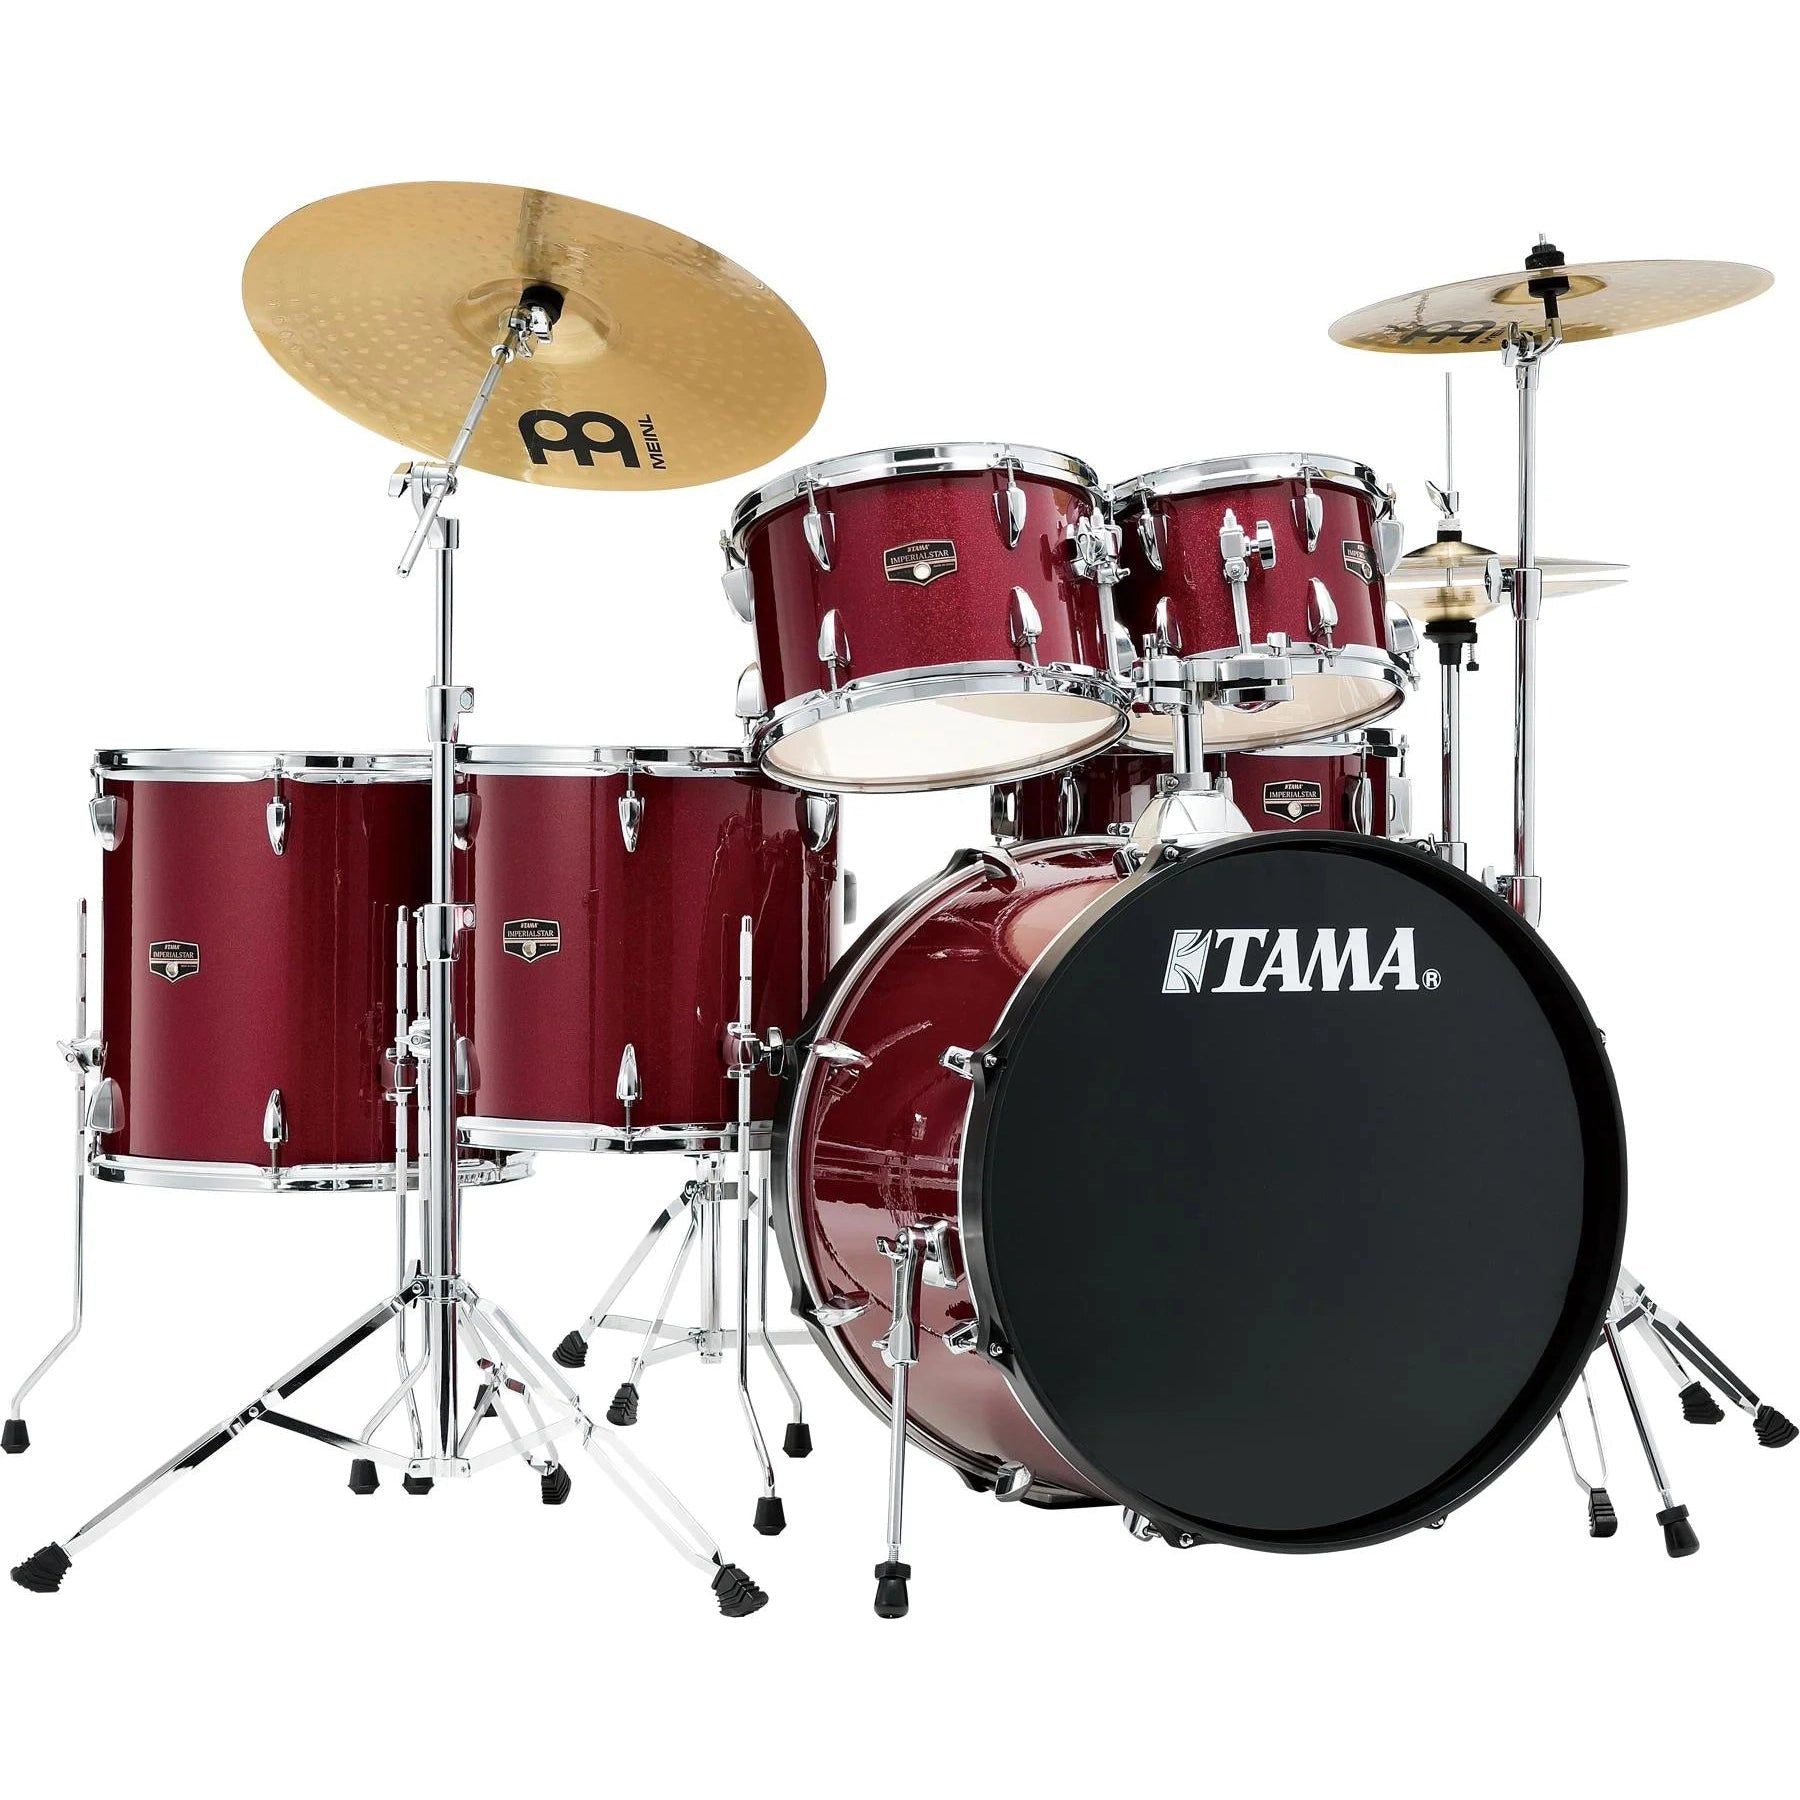 Trống Cơ Tama imperialstar IE62C (22/10-12/14-16/14 + Cymbal), Accu-Tune Hoop - Việt Music